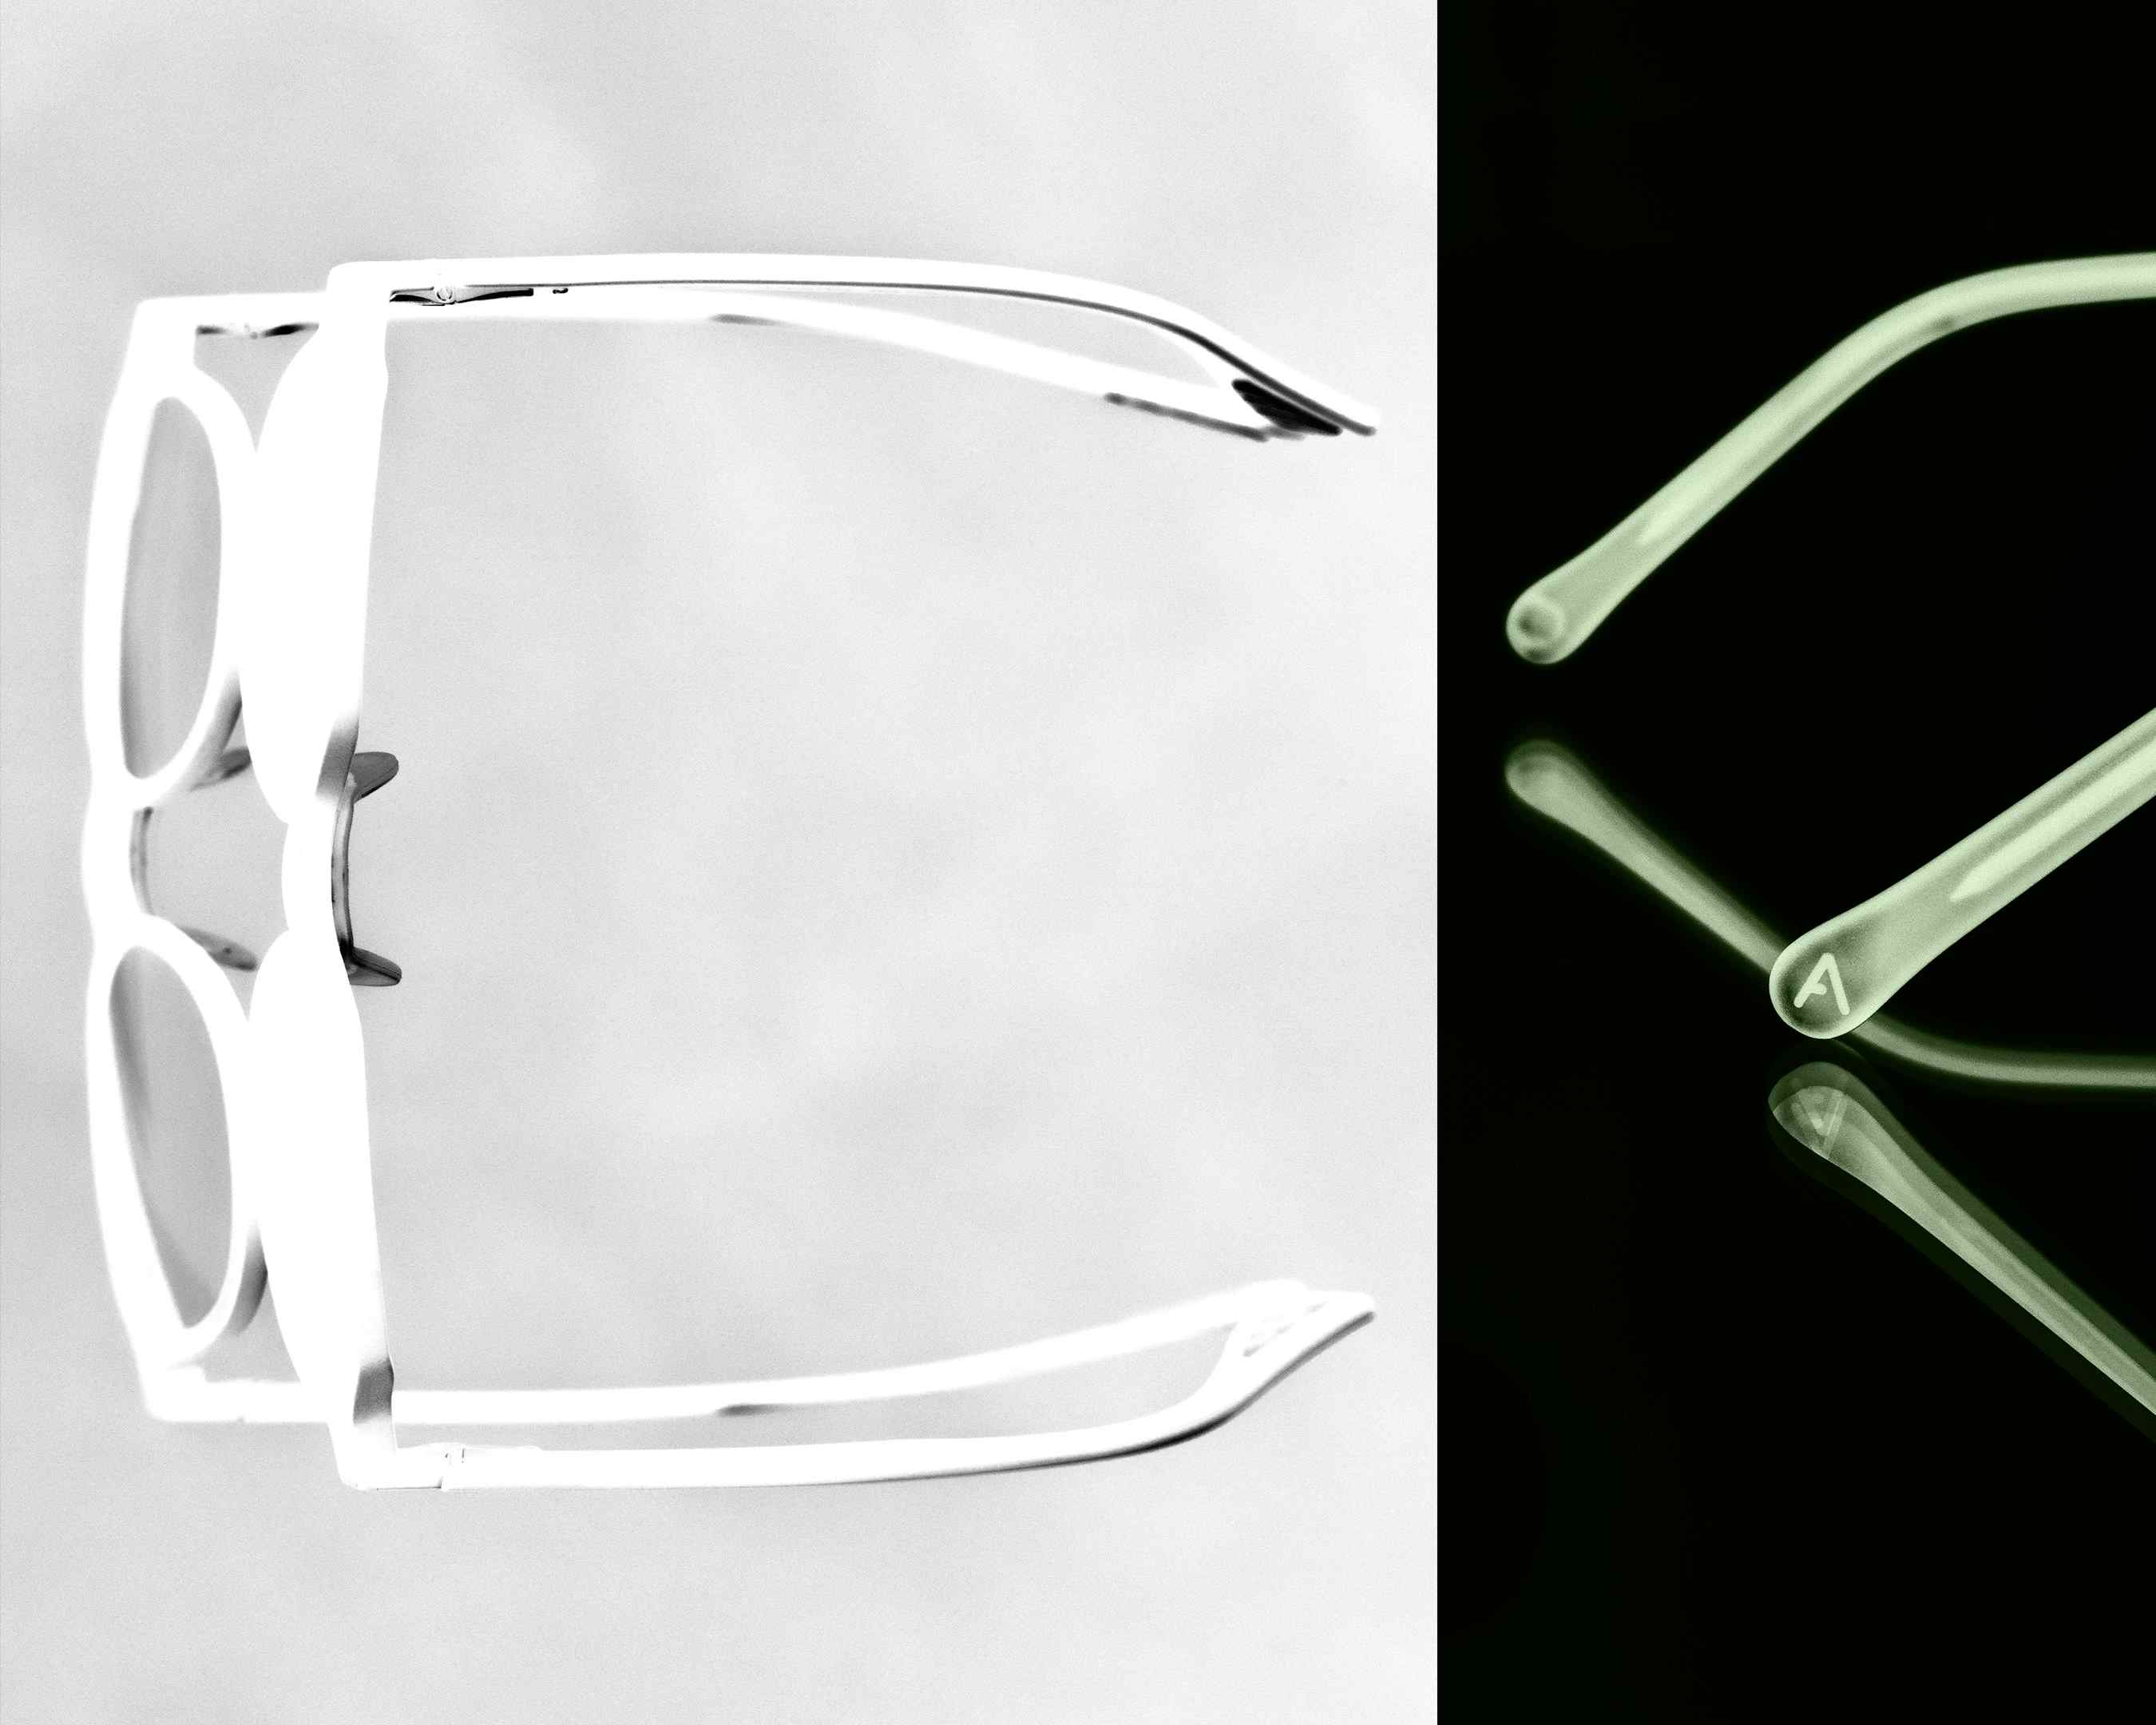 Article One Eyewear Art Direction, Imagery & Layout Design Editorial & Brand Collateral